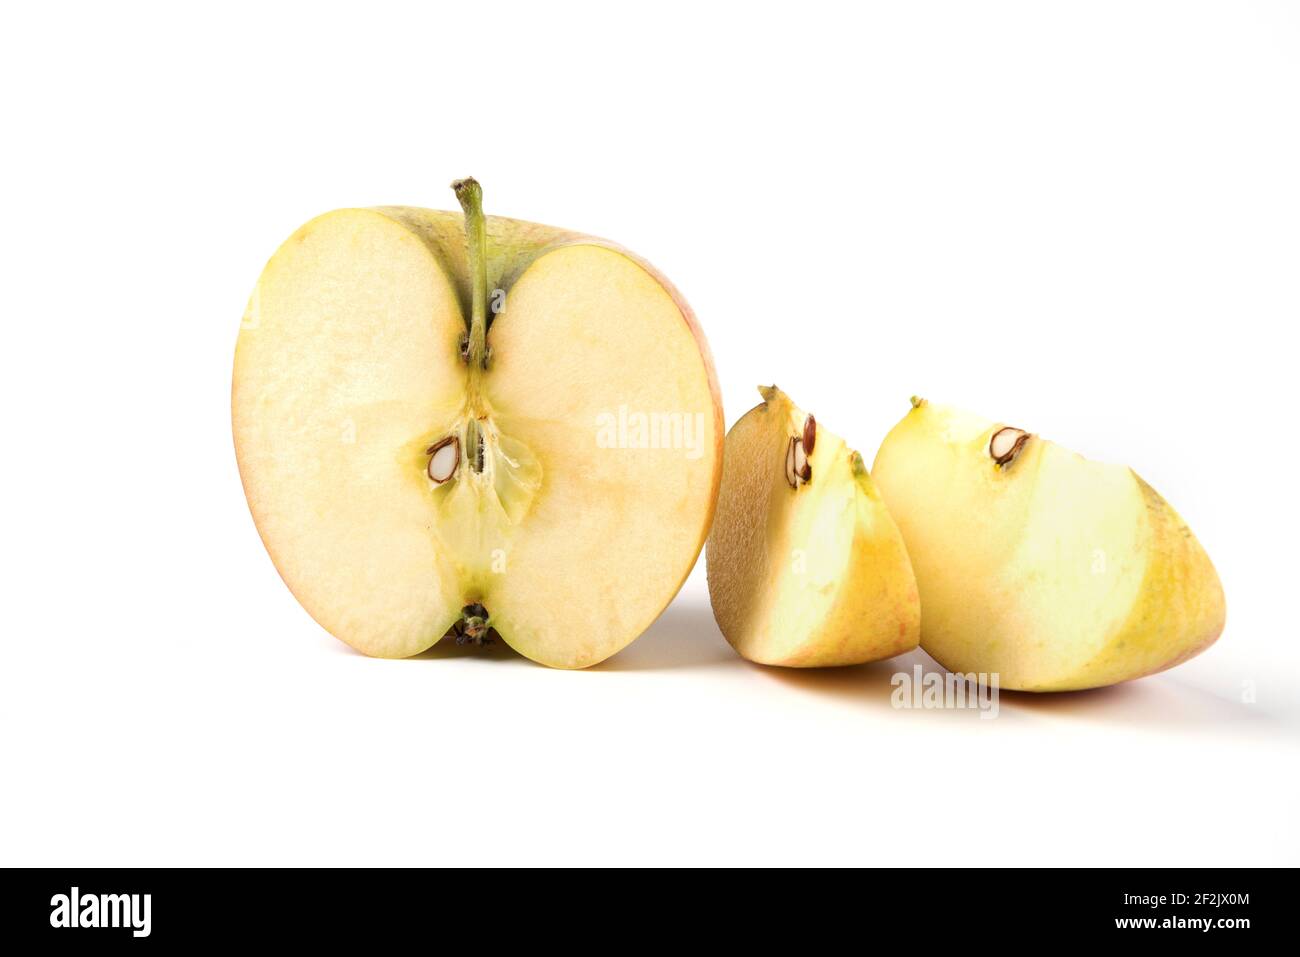 Apple slices isolated on white background micro view Stock Photo